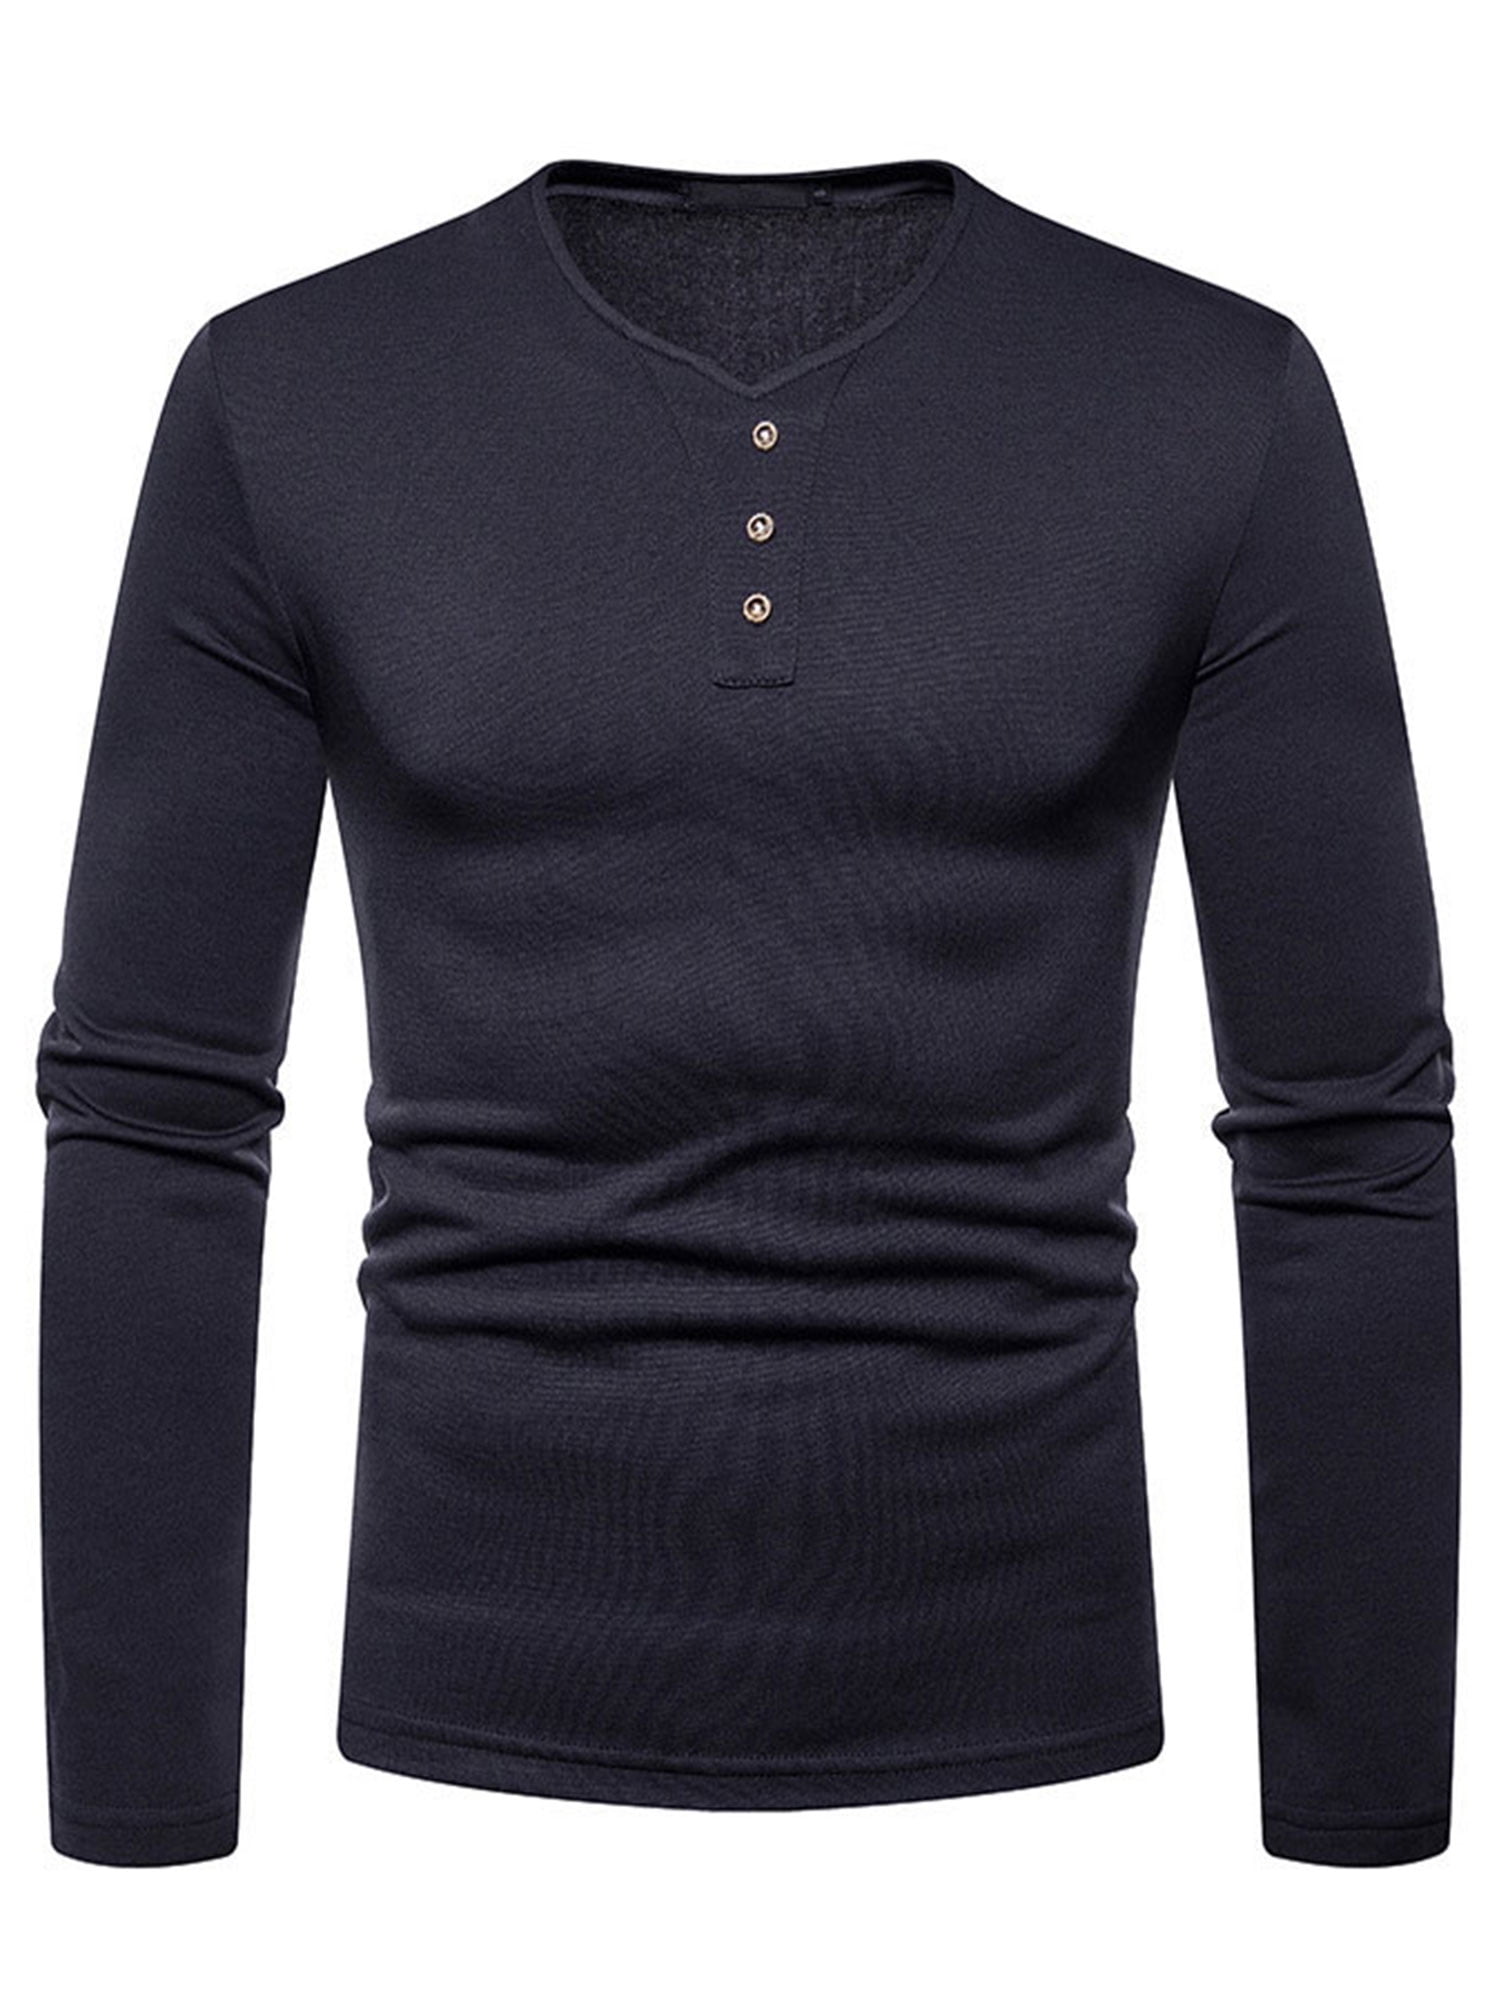 Winter V Neck Slim Fit Pullover Shirts for Men Casual Long Sleeve ...